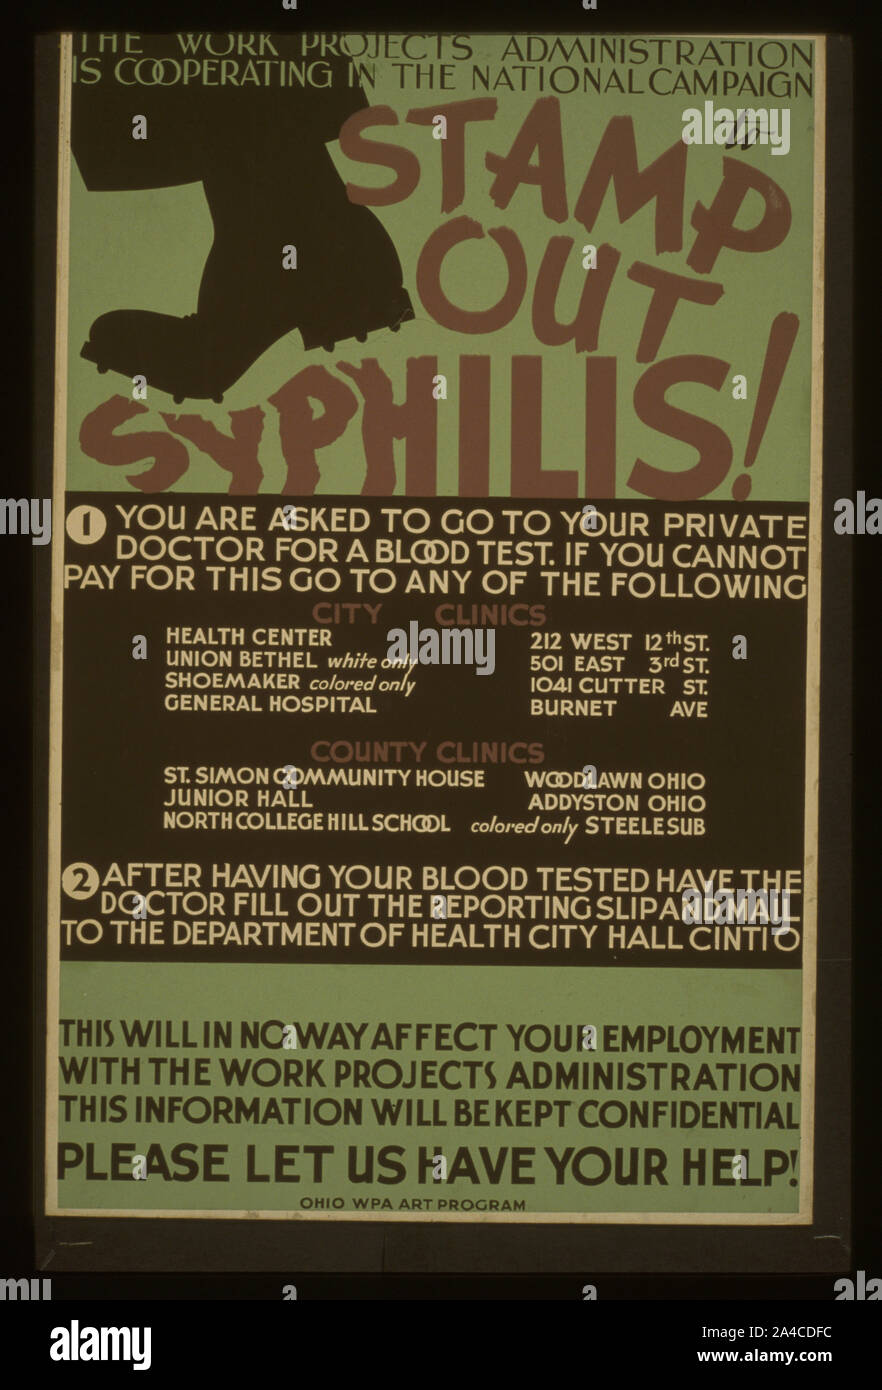 The  Work Projects Administration is cooperating in the national campaign to stamp out syphilis! Stock Photo